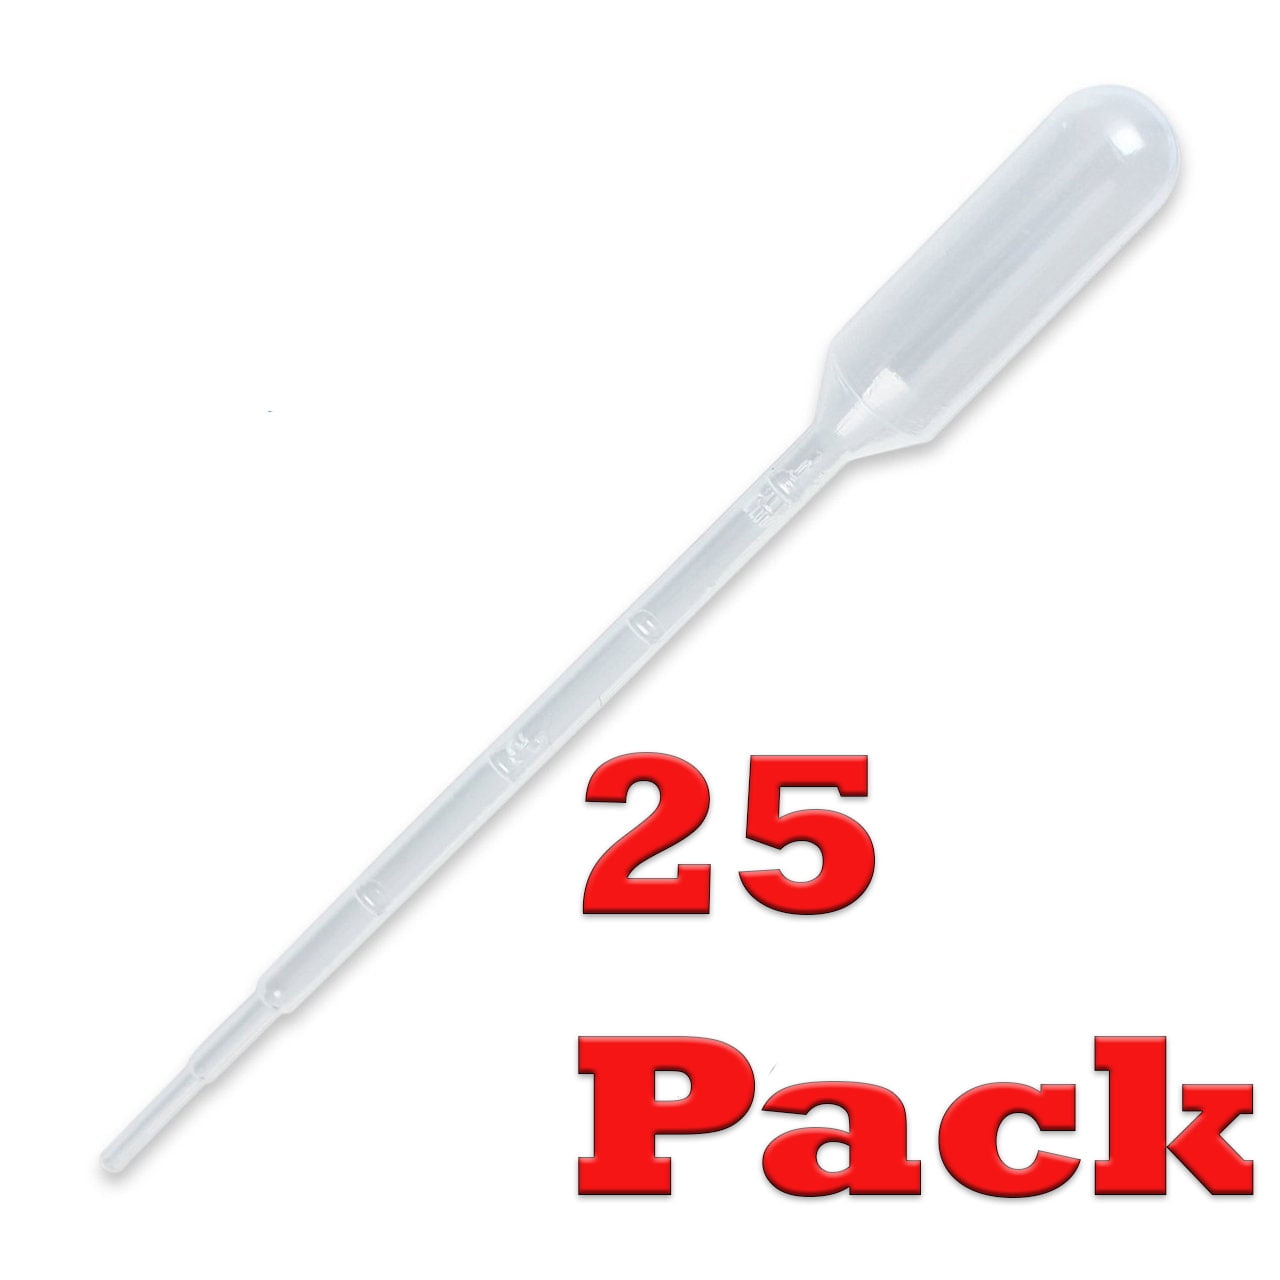 Plastic Transfer Pipettes 3ML, 200 Disposable Measuring Calibrated Dropper Pipettes Suitable for Mixing Acrylic Paints Essential Oils /& Science Laboratory